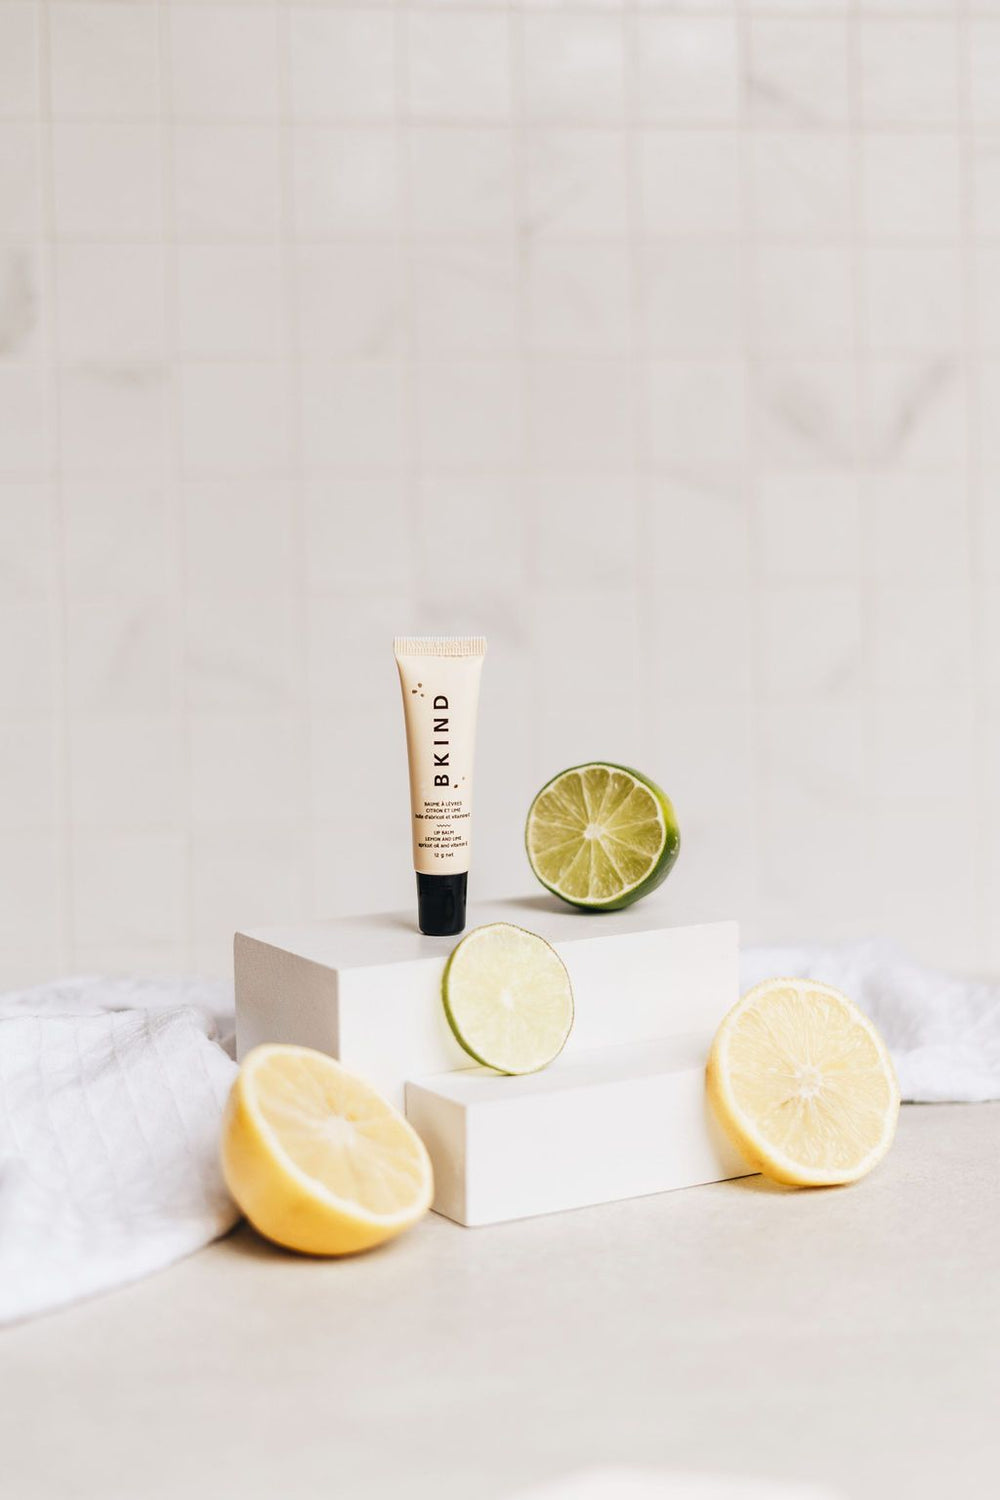 BKIND natural vegan lip balm - Lemon and Lime - Displayed with cut lemons and limes on two white blocks - small tube of BKIND lip balm with a black lid standing upright on the white blocks.